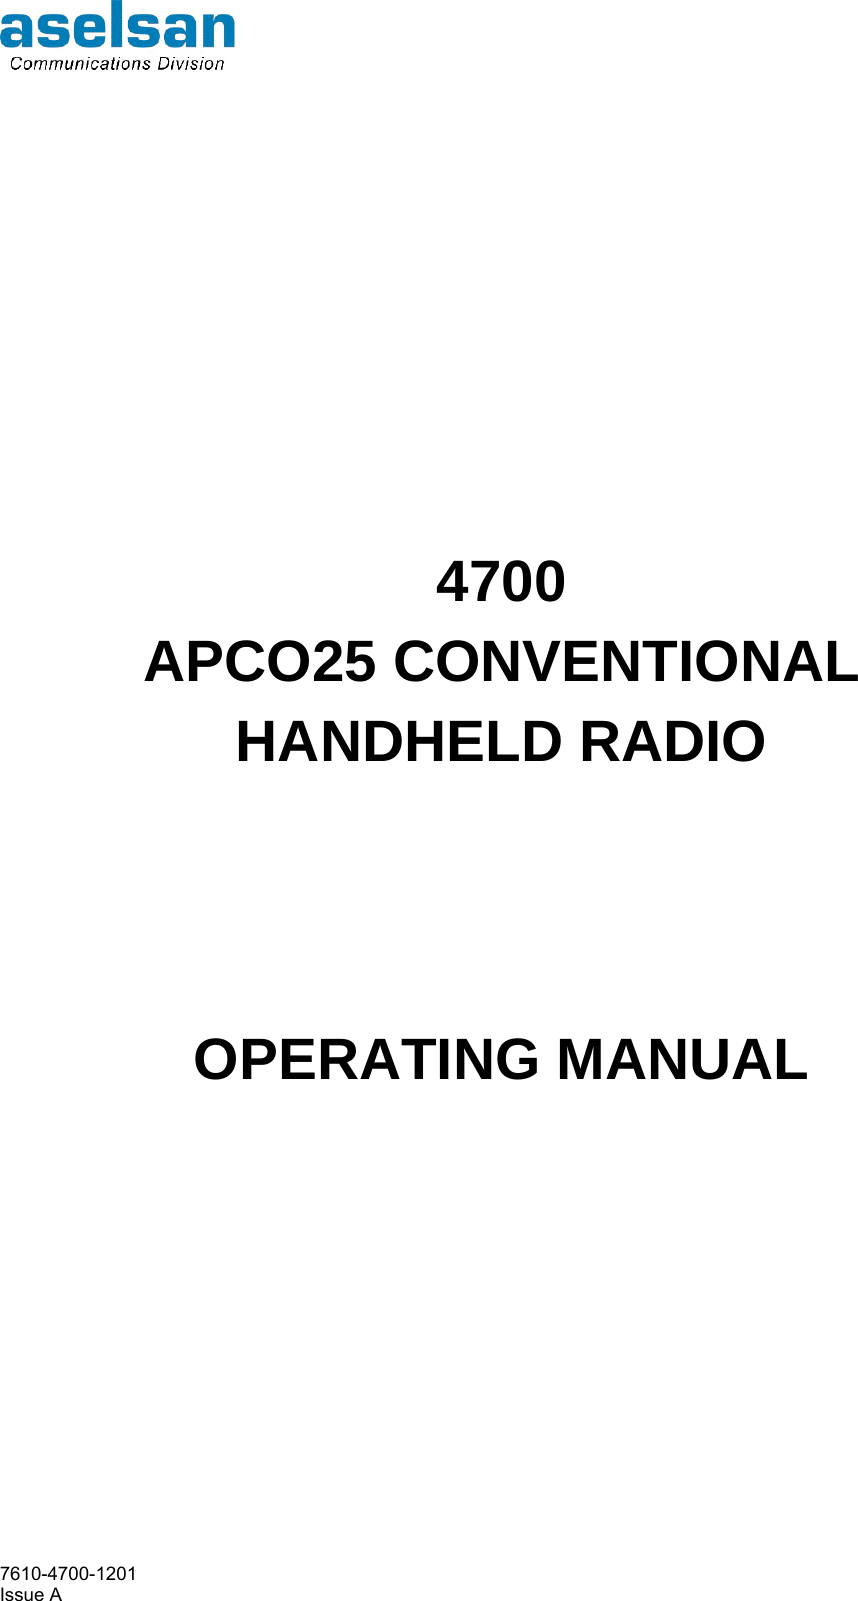     7610-4700-1201 Issue A 4700 APCO25 CONVENTIONAL  HANDHELD RADIO    OPERATING MANUAL  